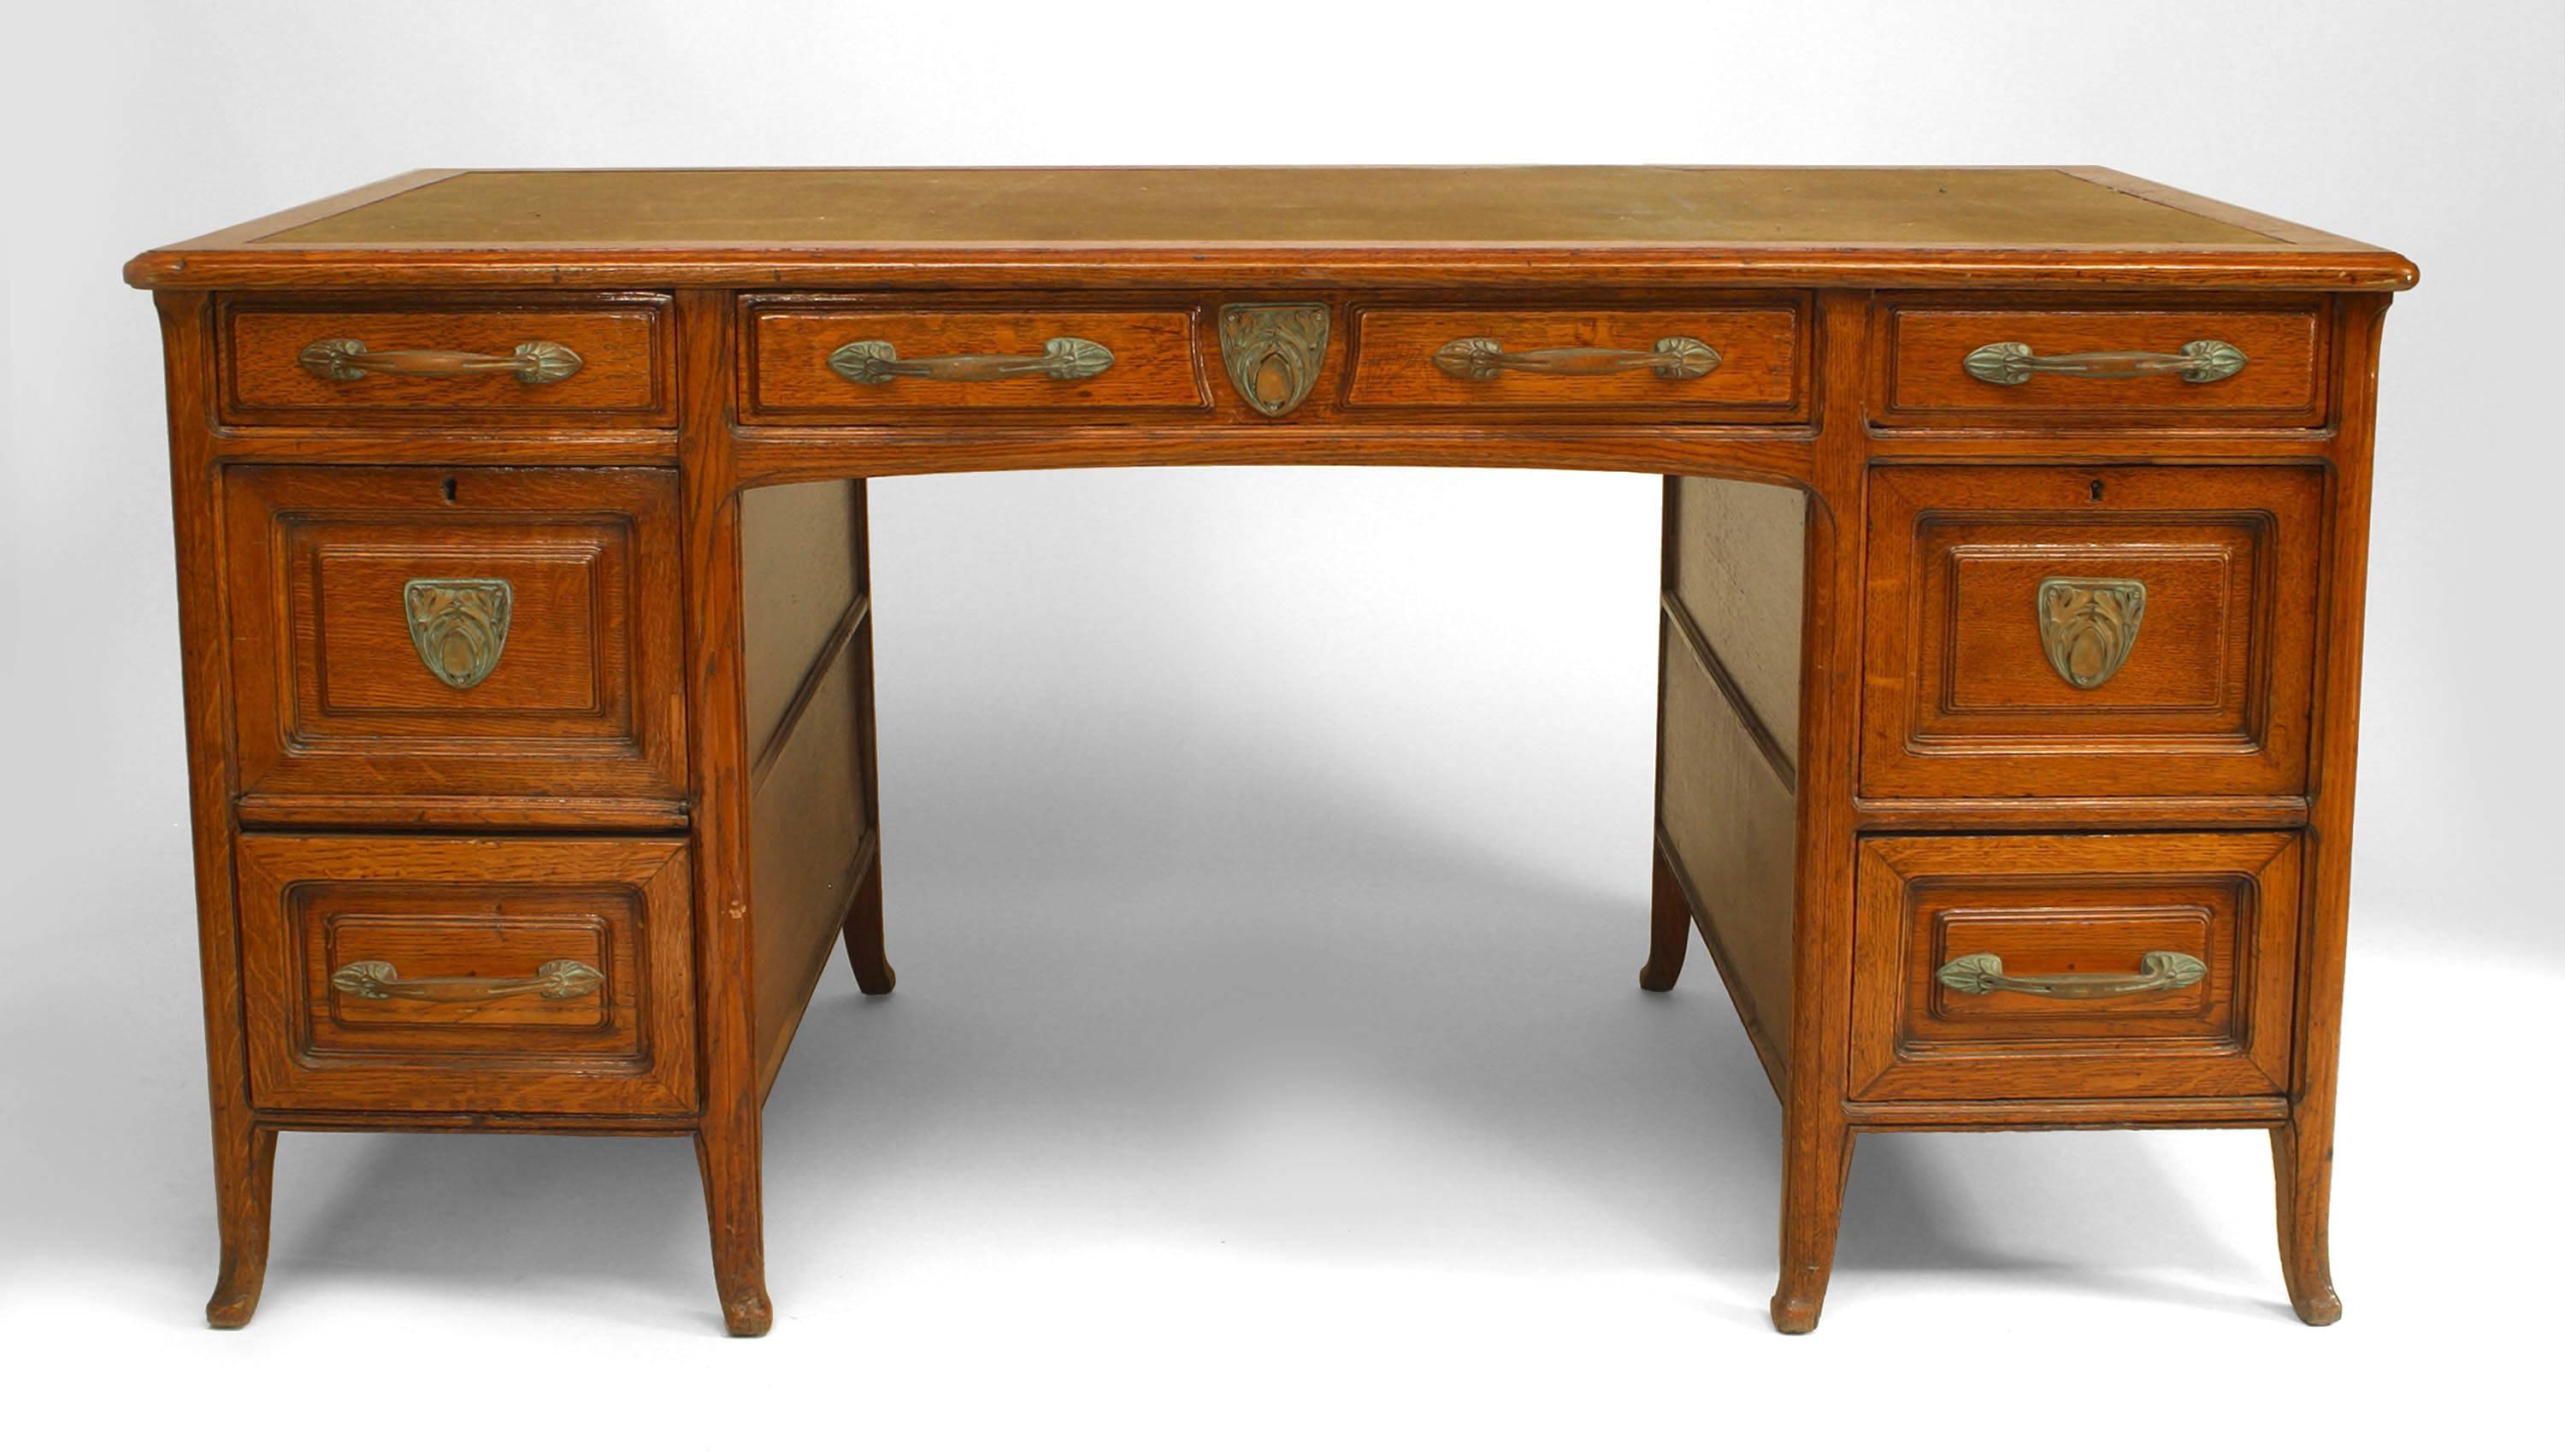 French Provincial (19th century) oak kneehole desk with bronze Art Nouveau hardware and green felt top.
 